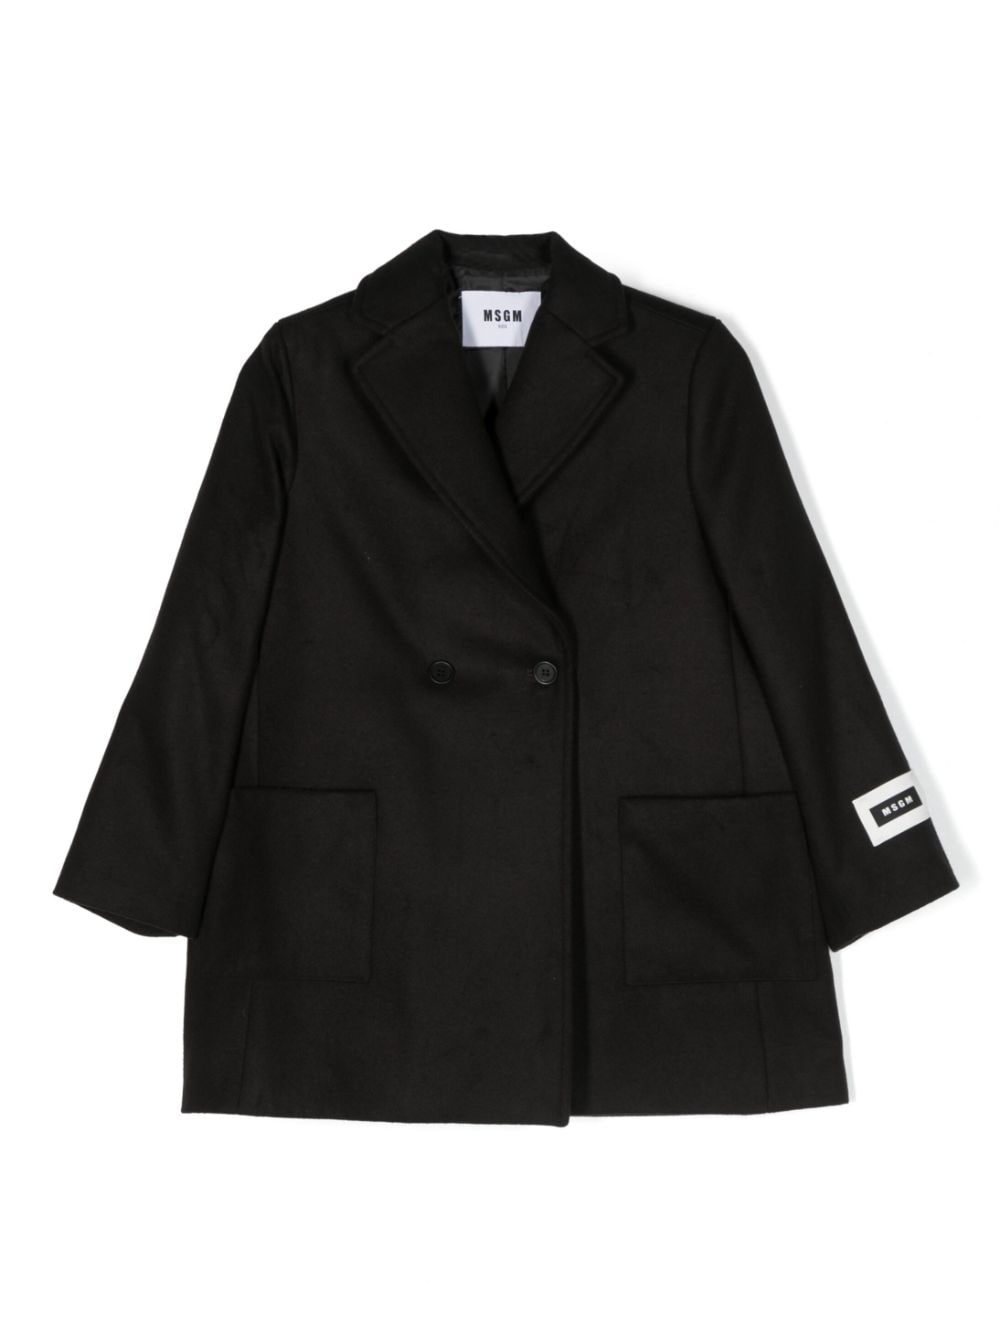 Msgm kids double-breasted coat